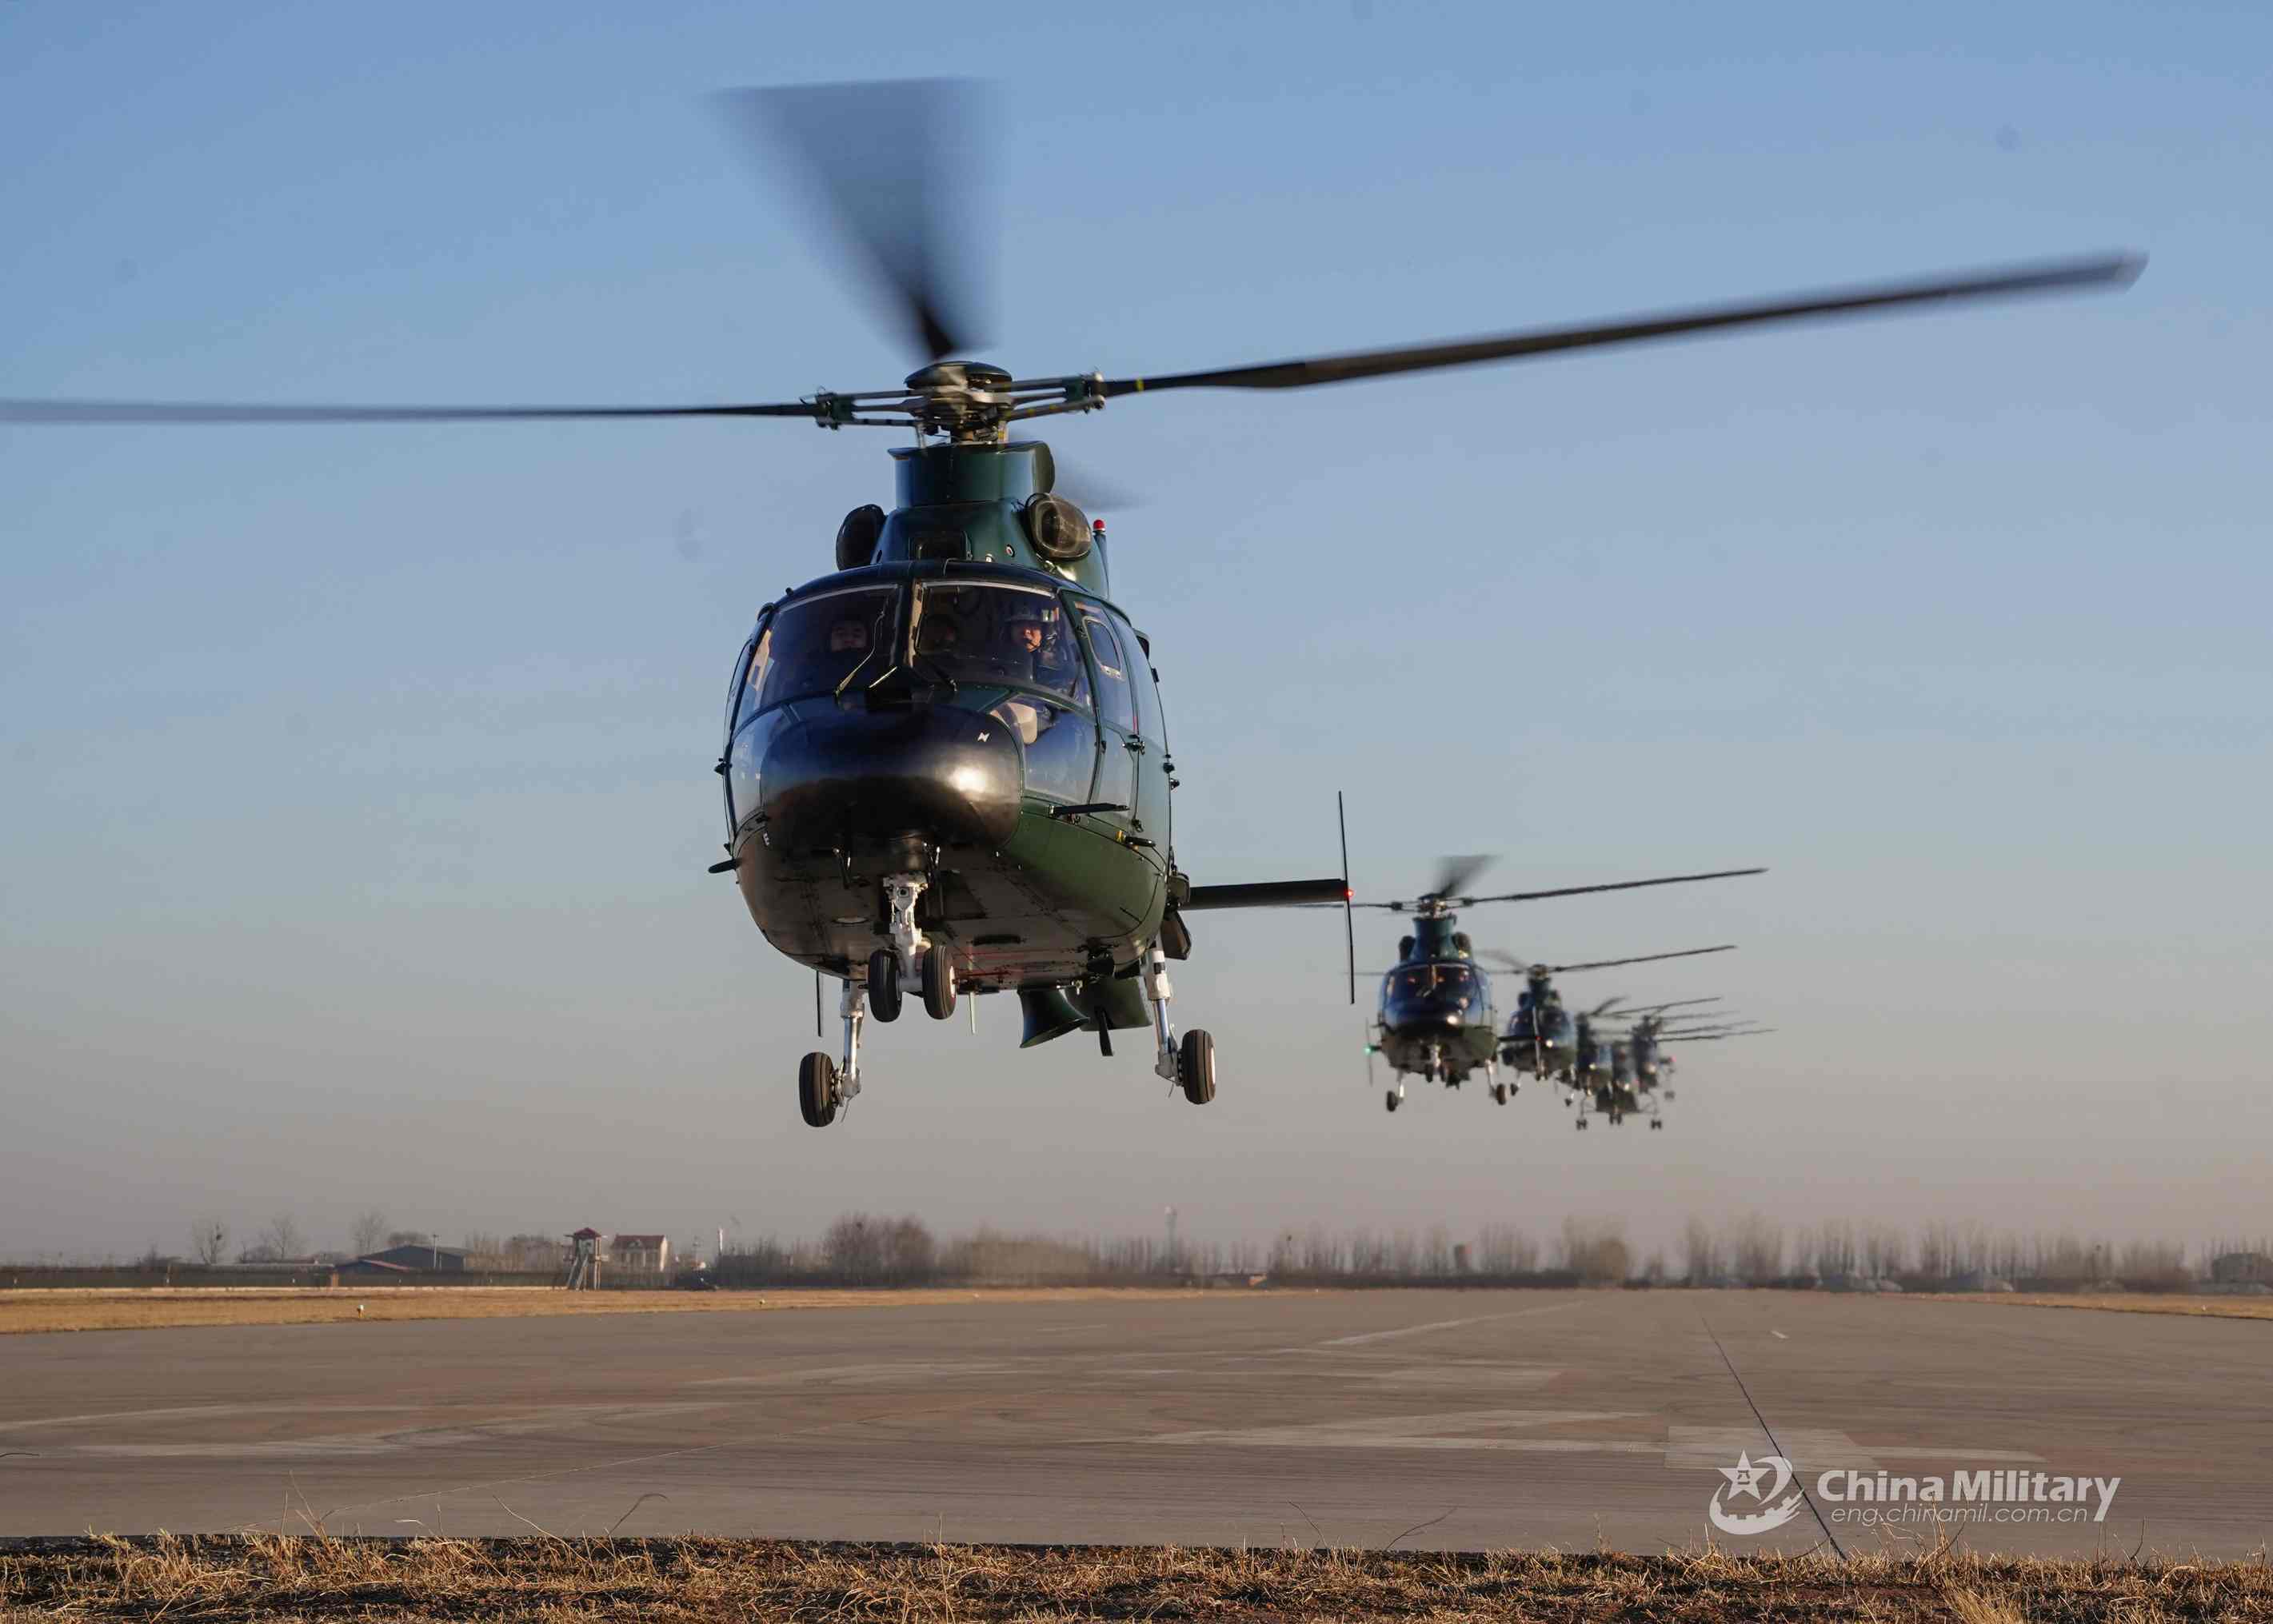 A cluster of Z-9 attack helicopters attached to a detachment with the People's Armed Police (PAP) Force lift off simultaneously for a flight training mission in early January, 2021. (eng.chinamil.com.cn/Photo by Zhang Xi)